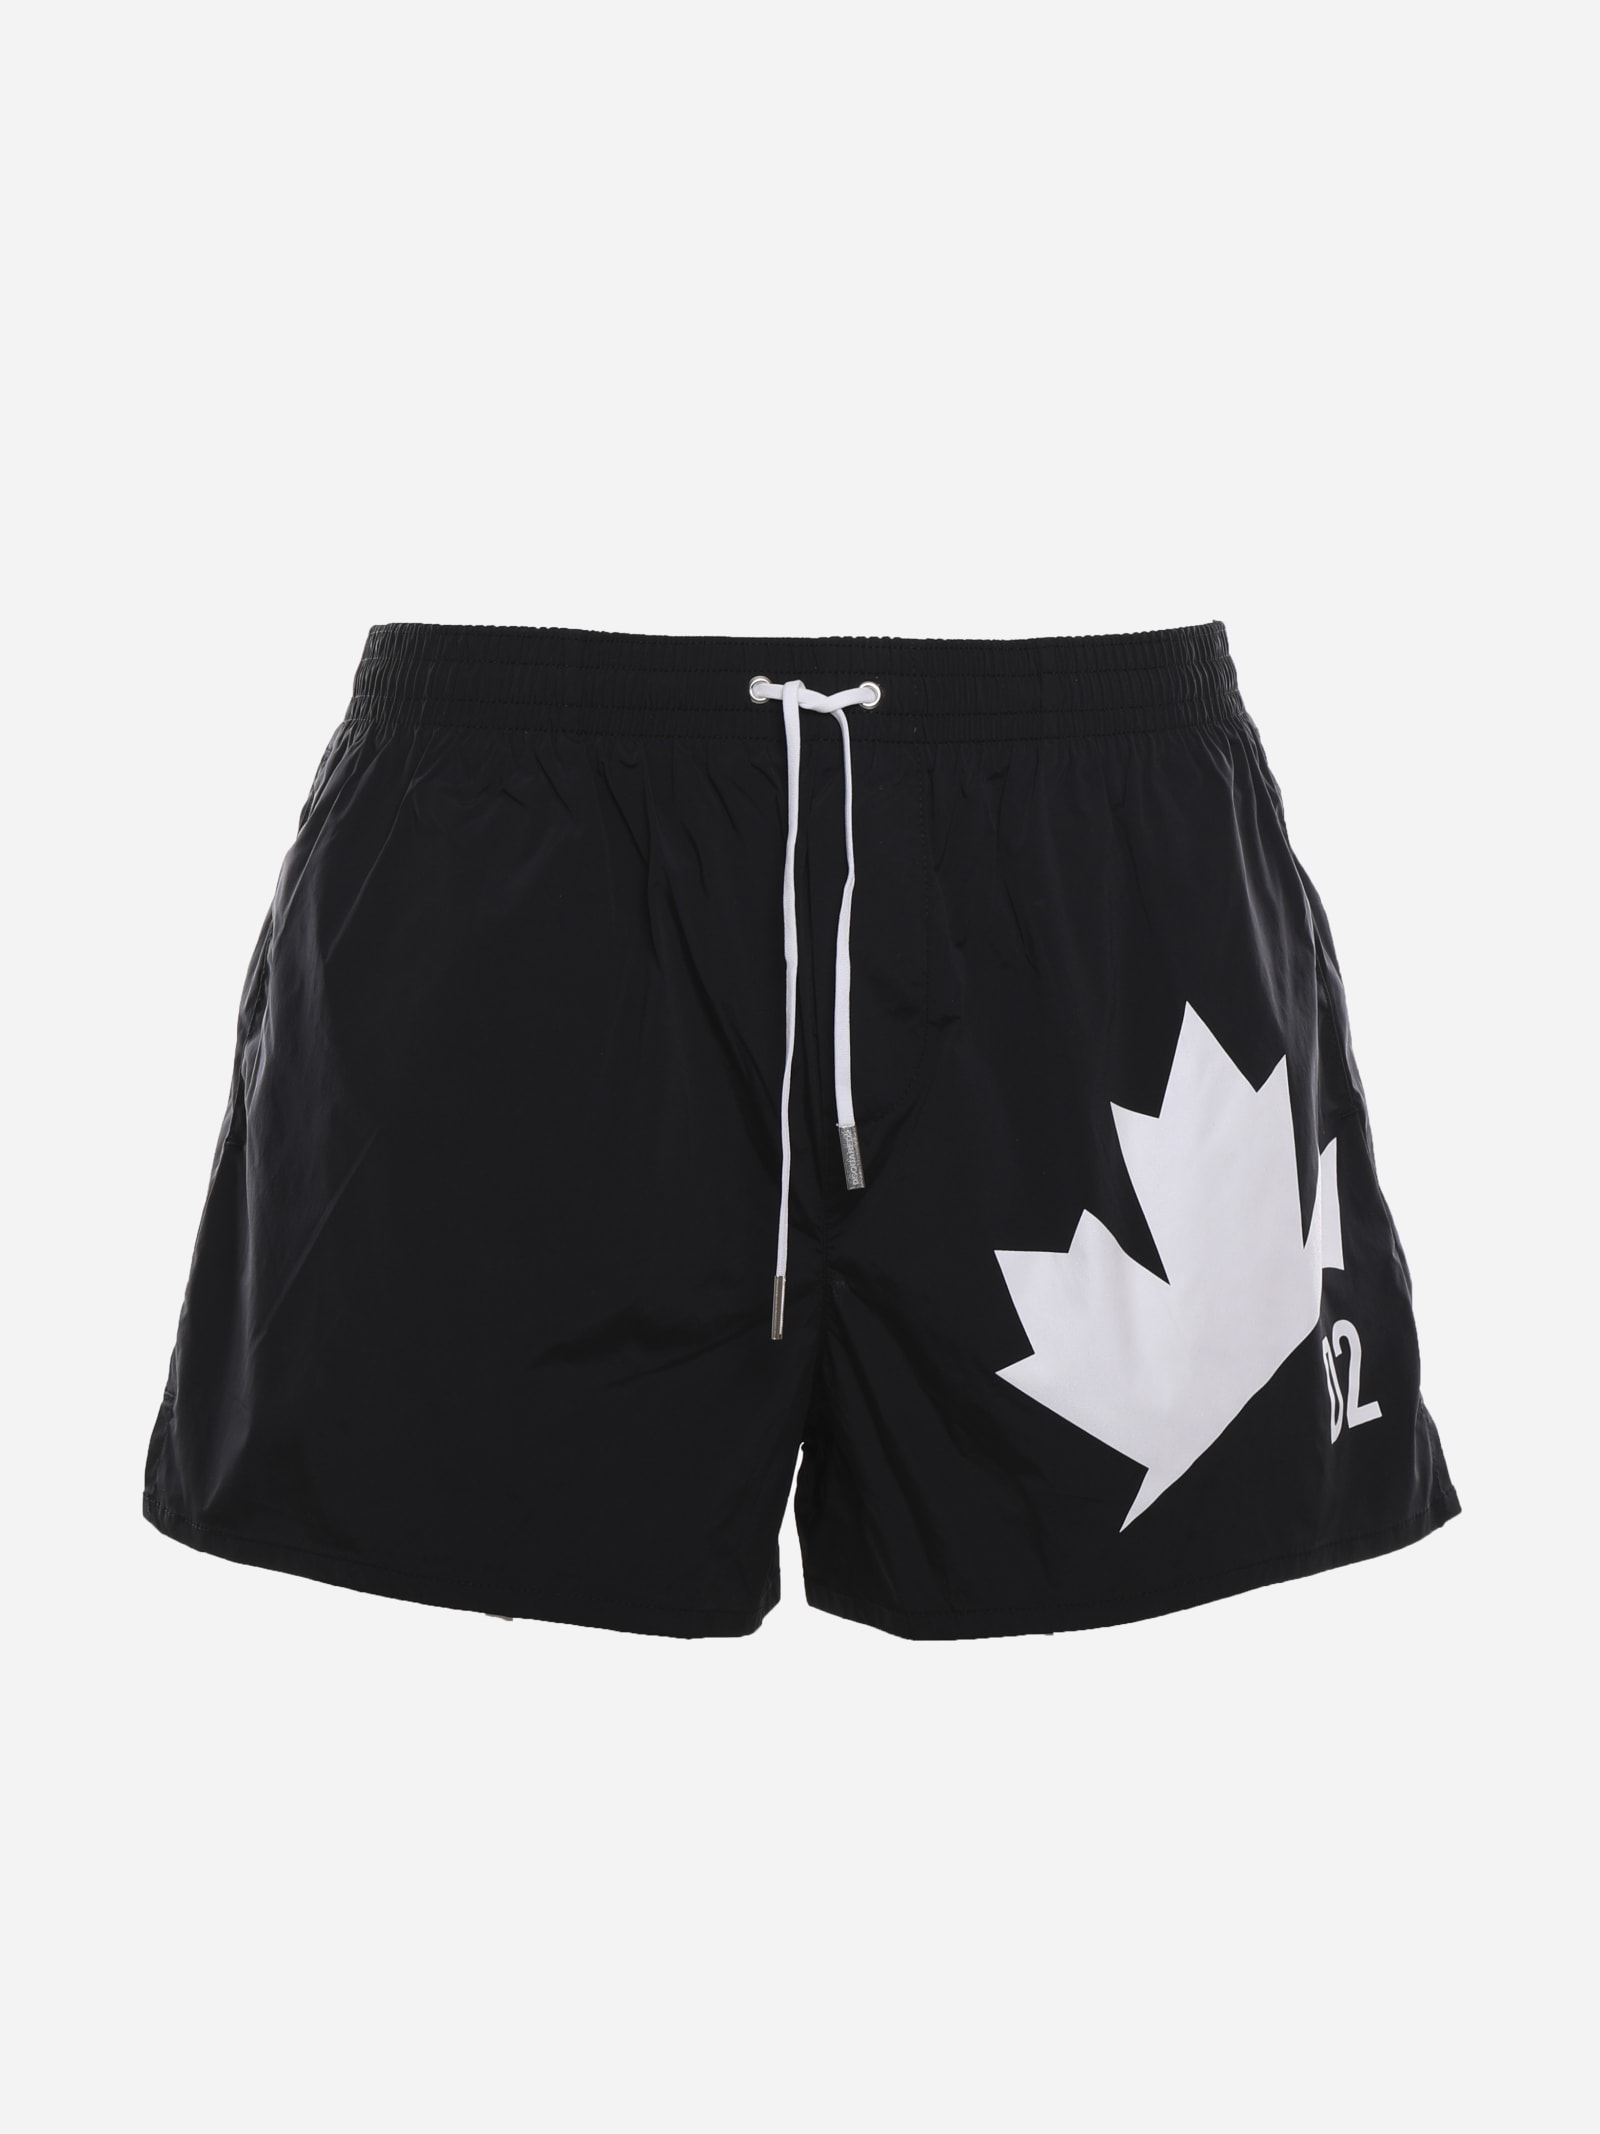 DSQUARED2 TECHNICAL FABRIC SWIM SHORTS WITH LOGO DETAIL,D7B643640 -001